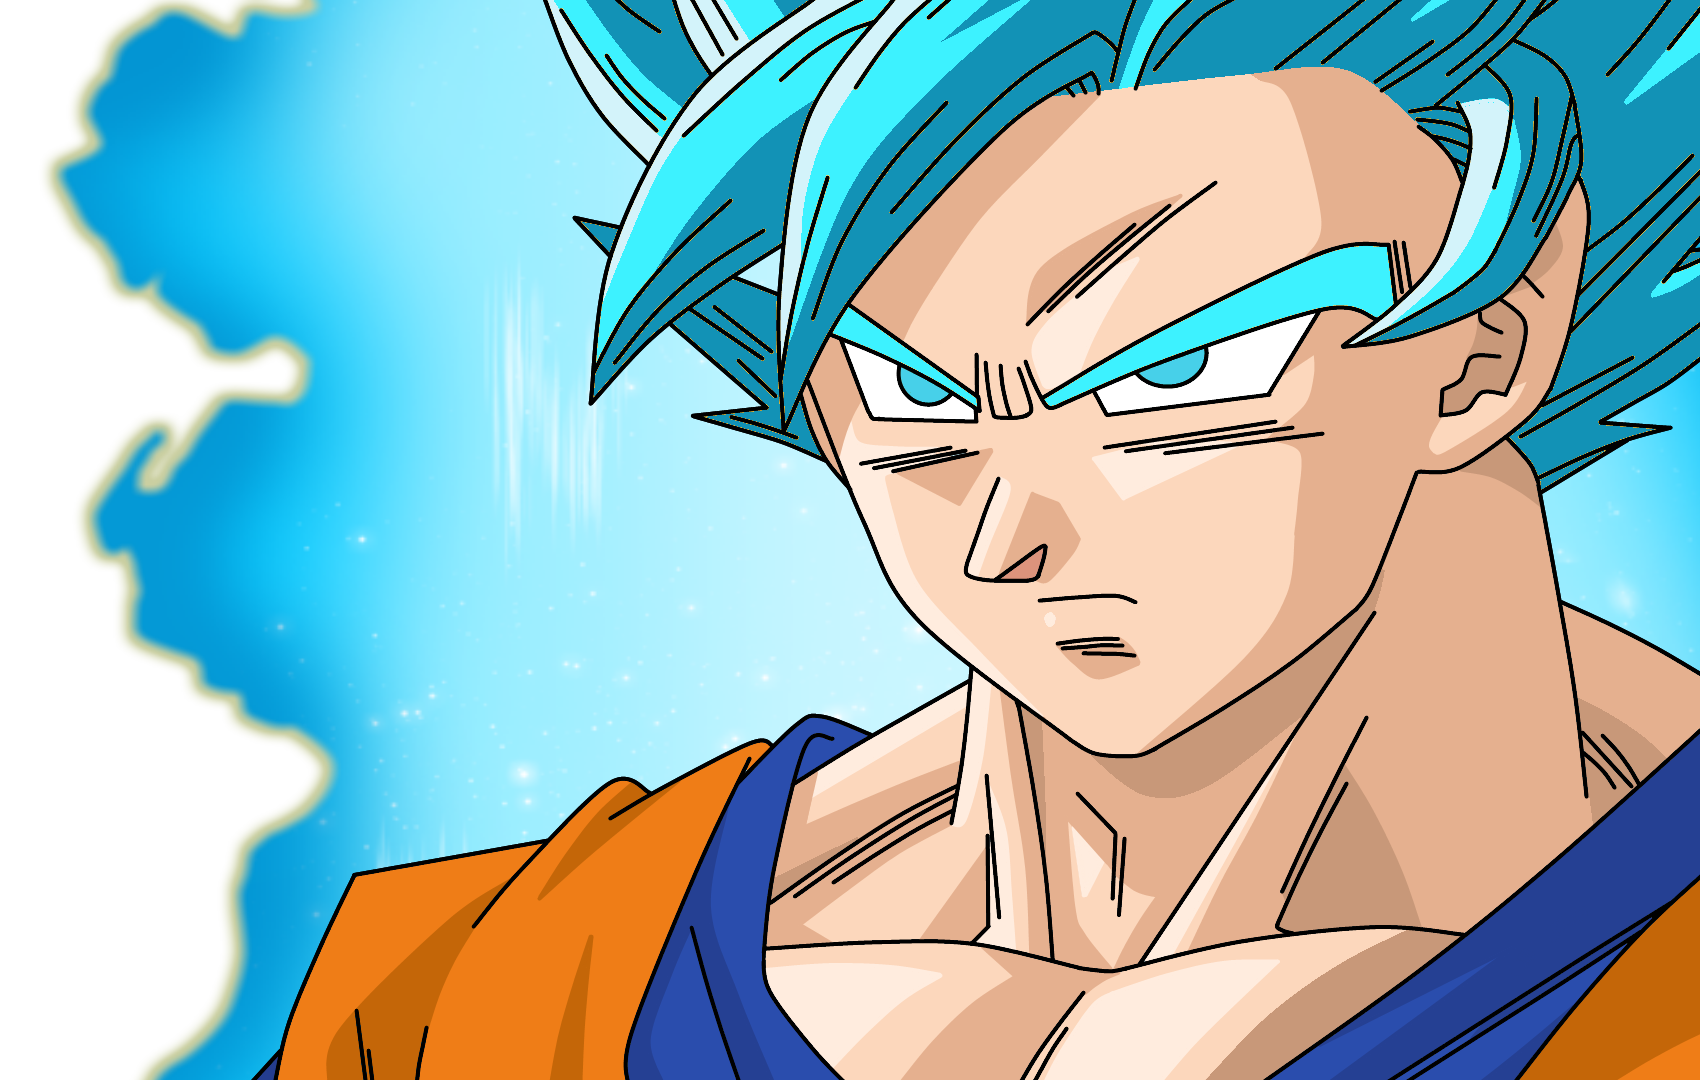 You photoshopped that pic of retro ssj goku and gave it blue hair. 